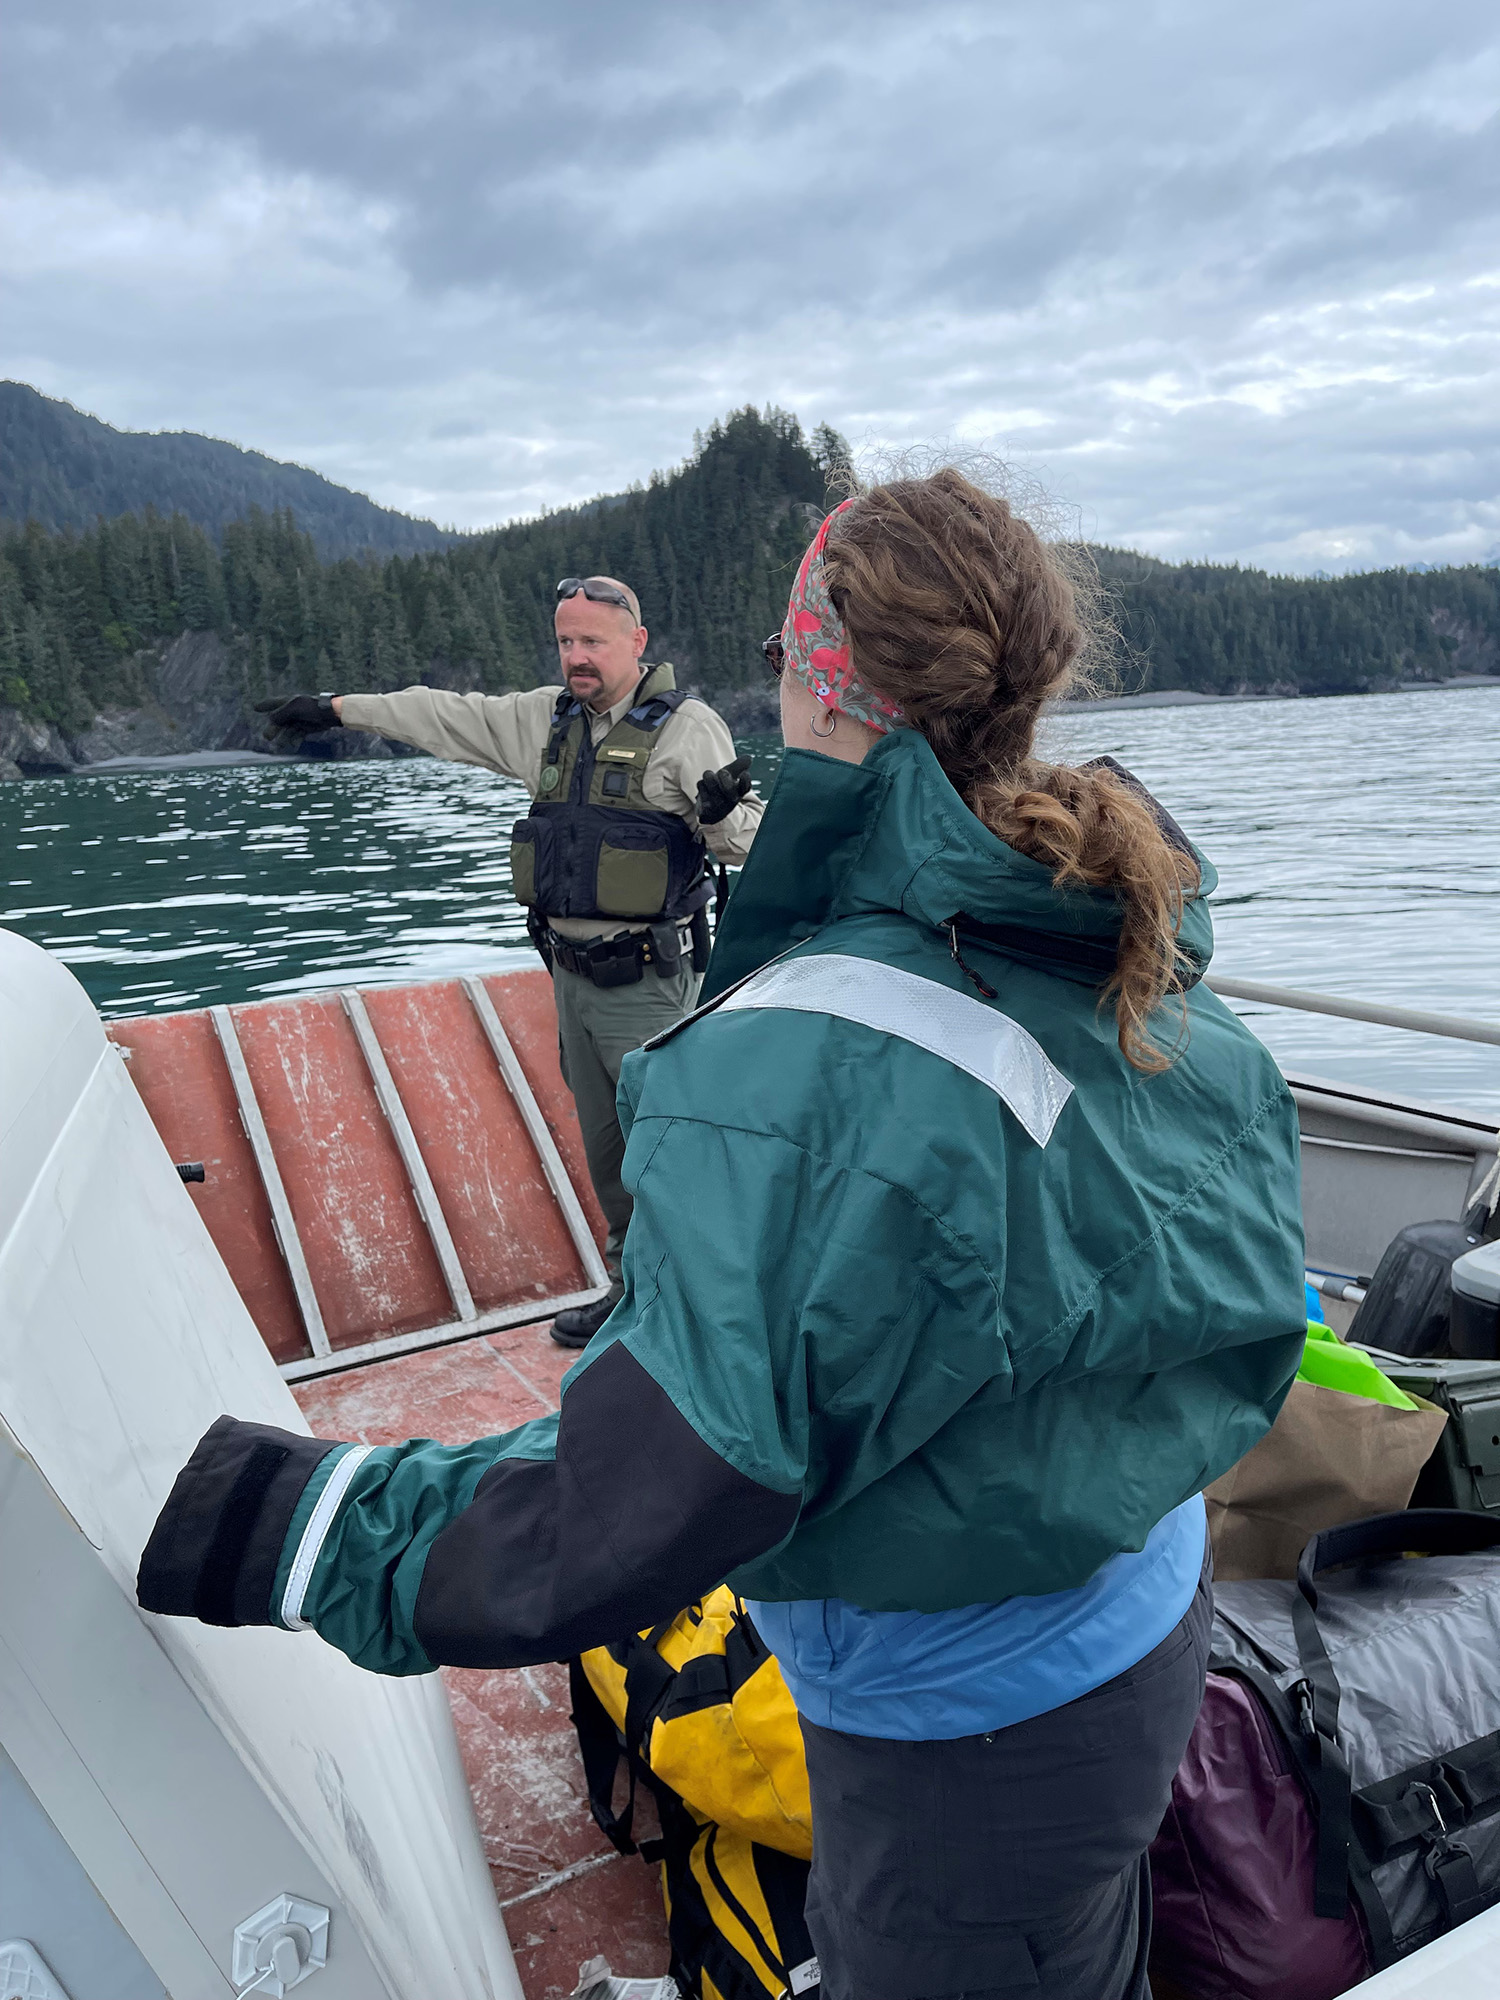 OHA team leader, Sarah Meitl, listens to Park Ranger Jack Ransom interpret the history and geography of Caines Head. September 2021